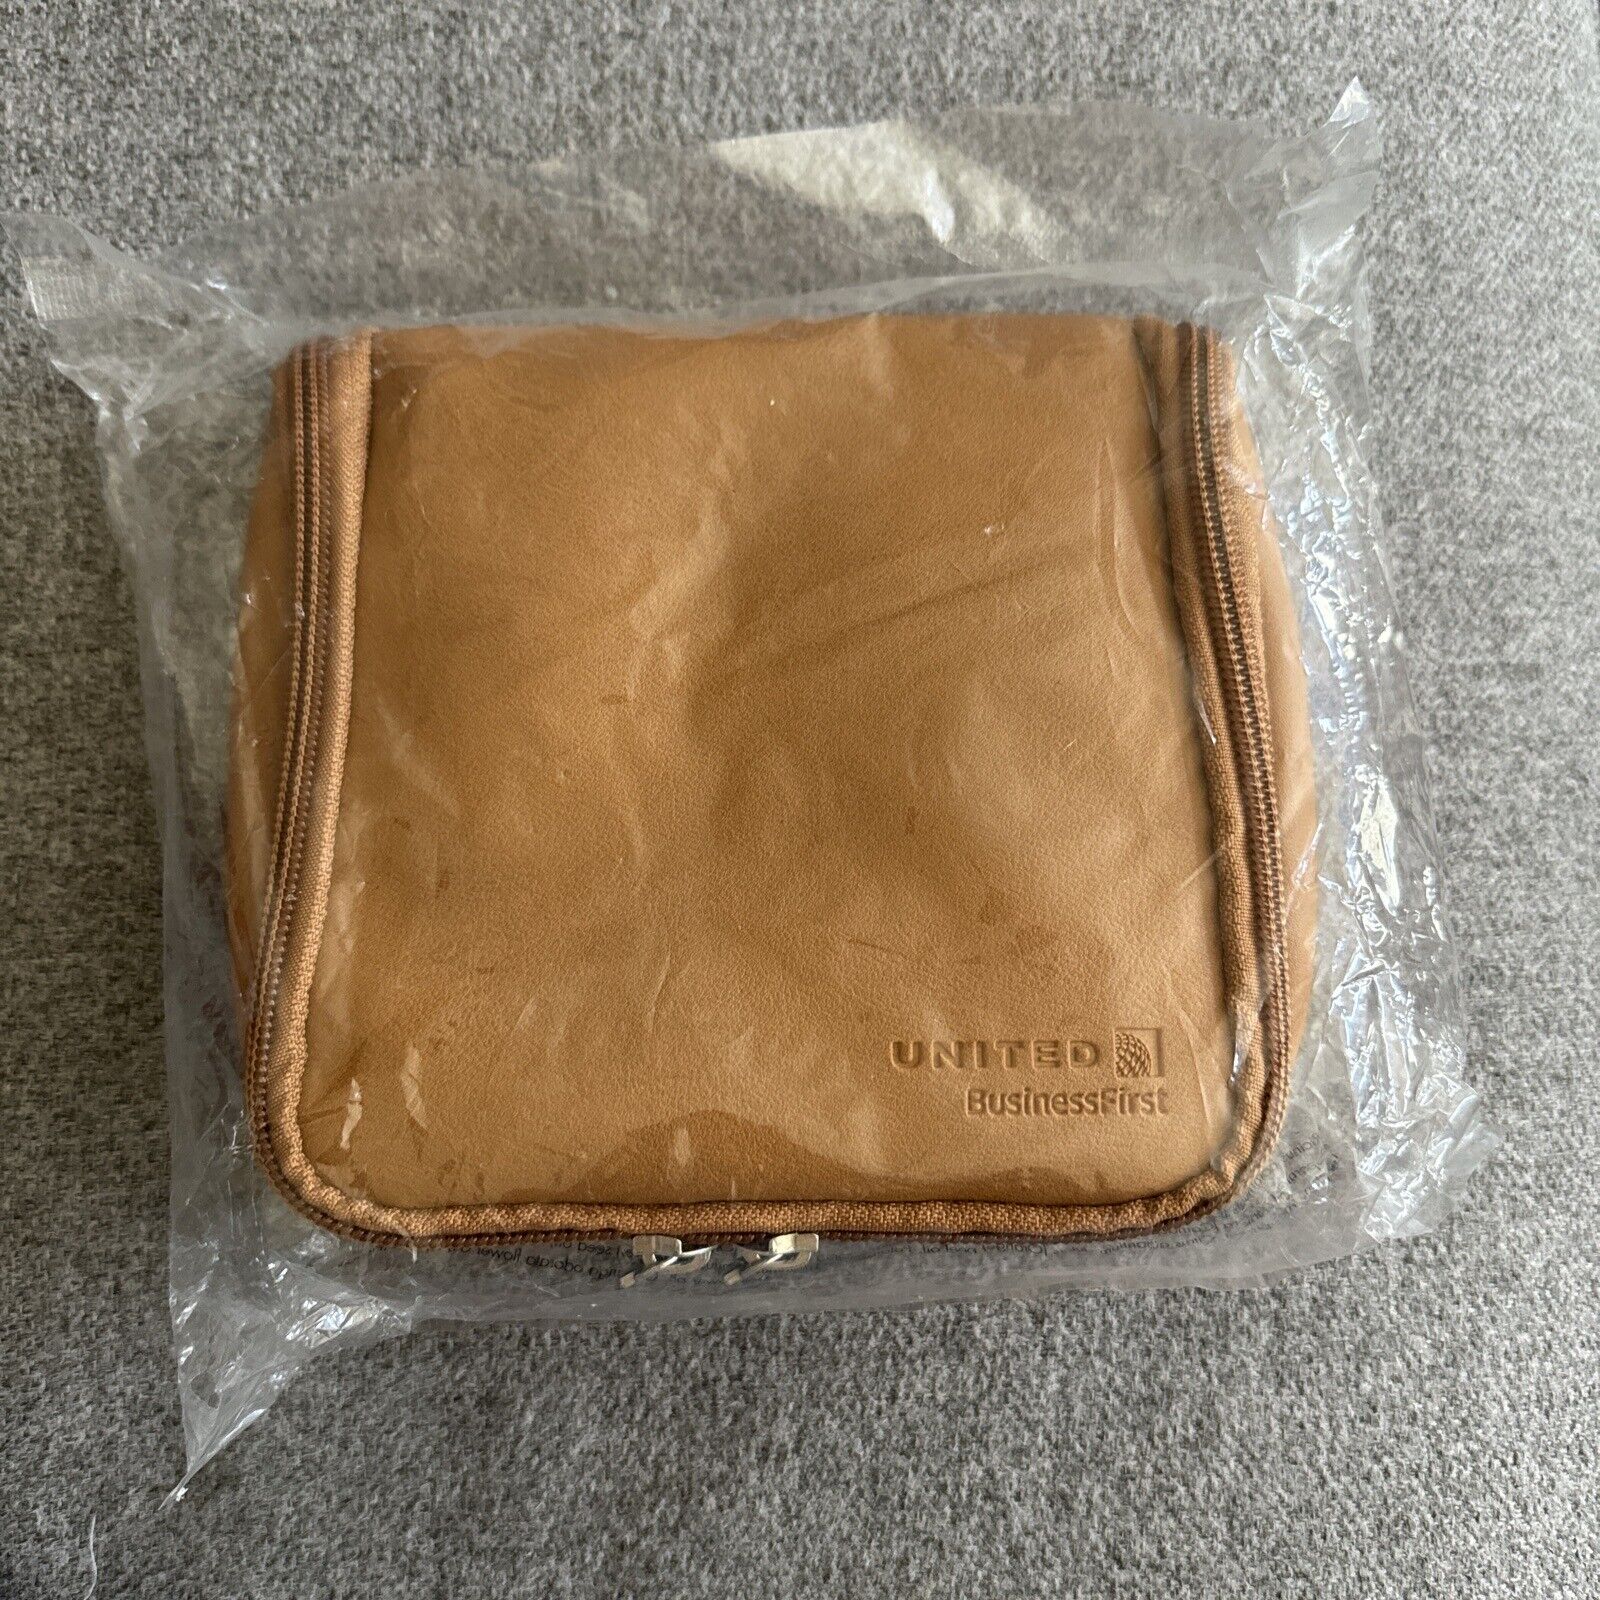 Vintage United Airlines Business First Class Amenity Travel Kit Cowshed Sealed